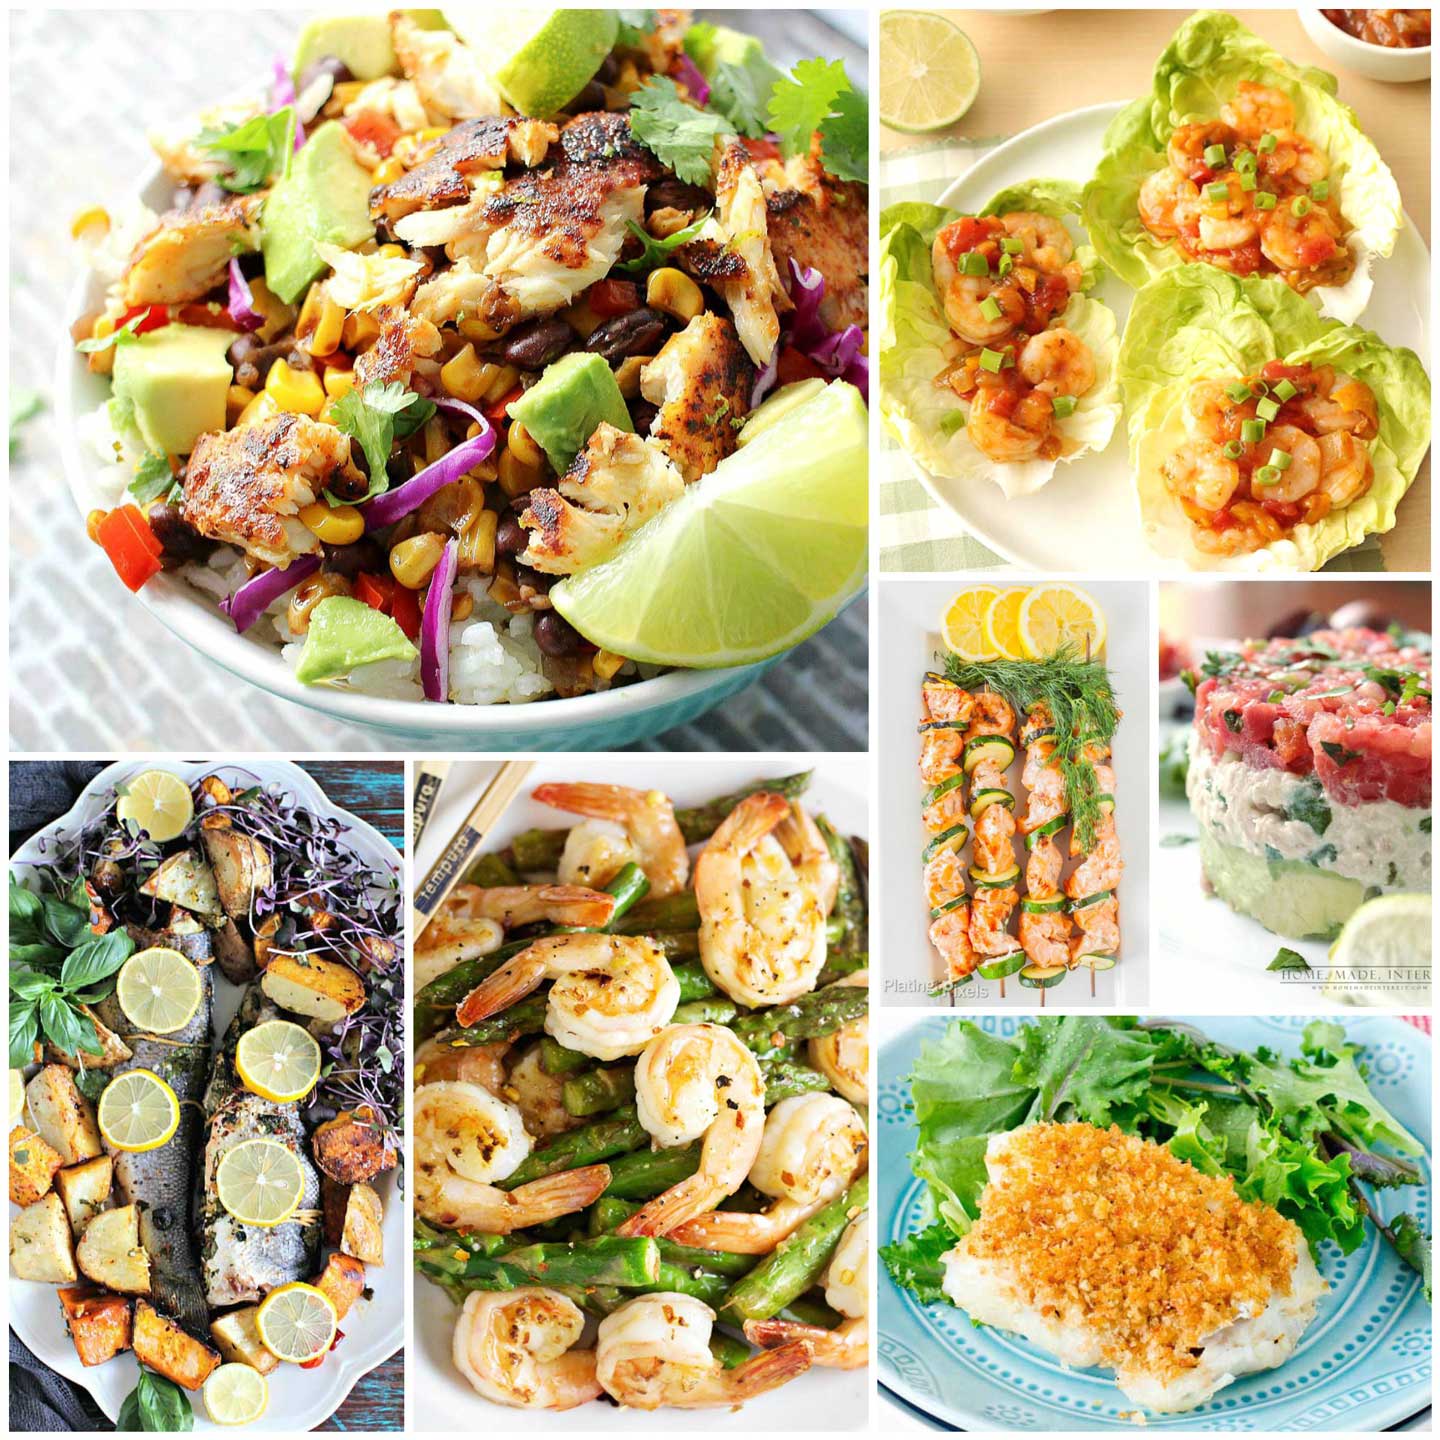 9 all-time best healthy, easy seafood and fish recipes - two healthy